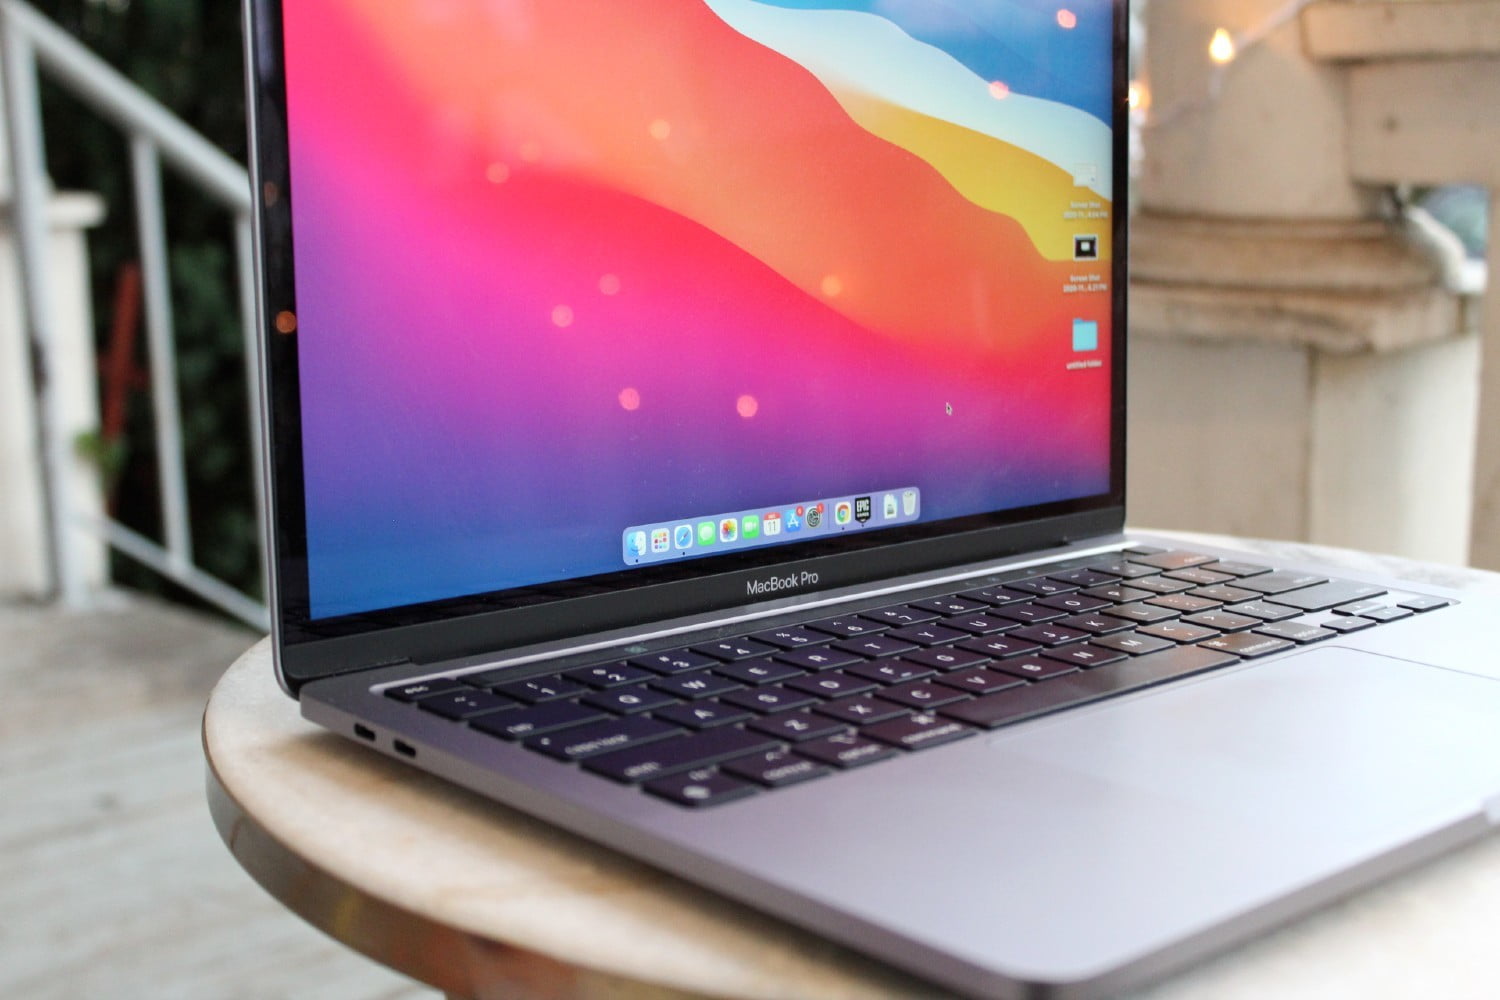 MacBook Pro 2021: News, rumors, price and release date